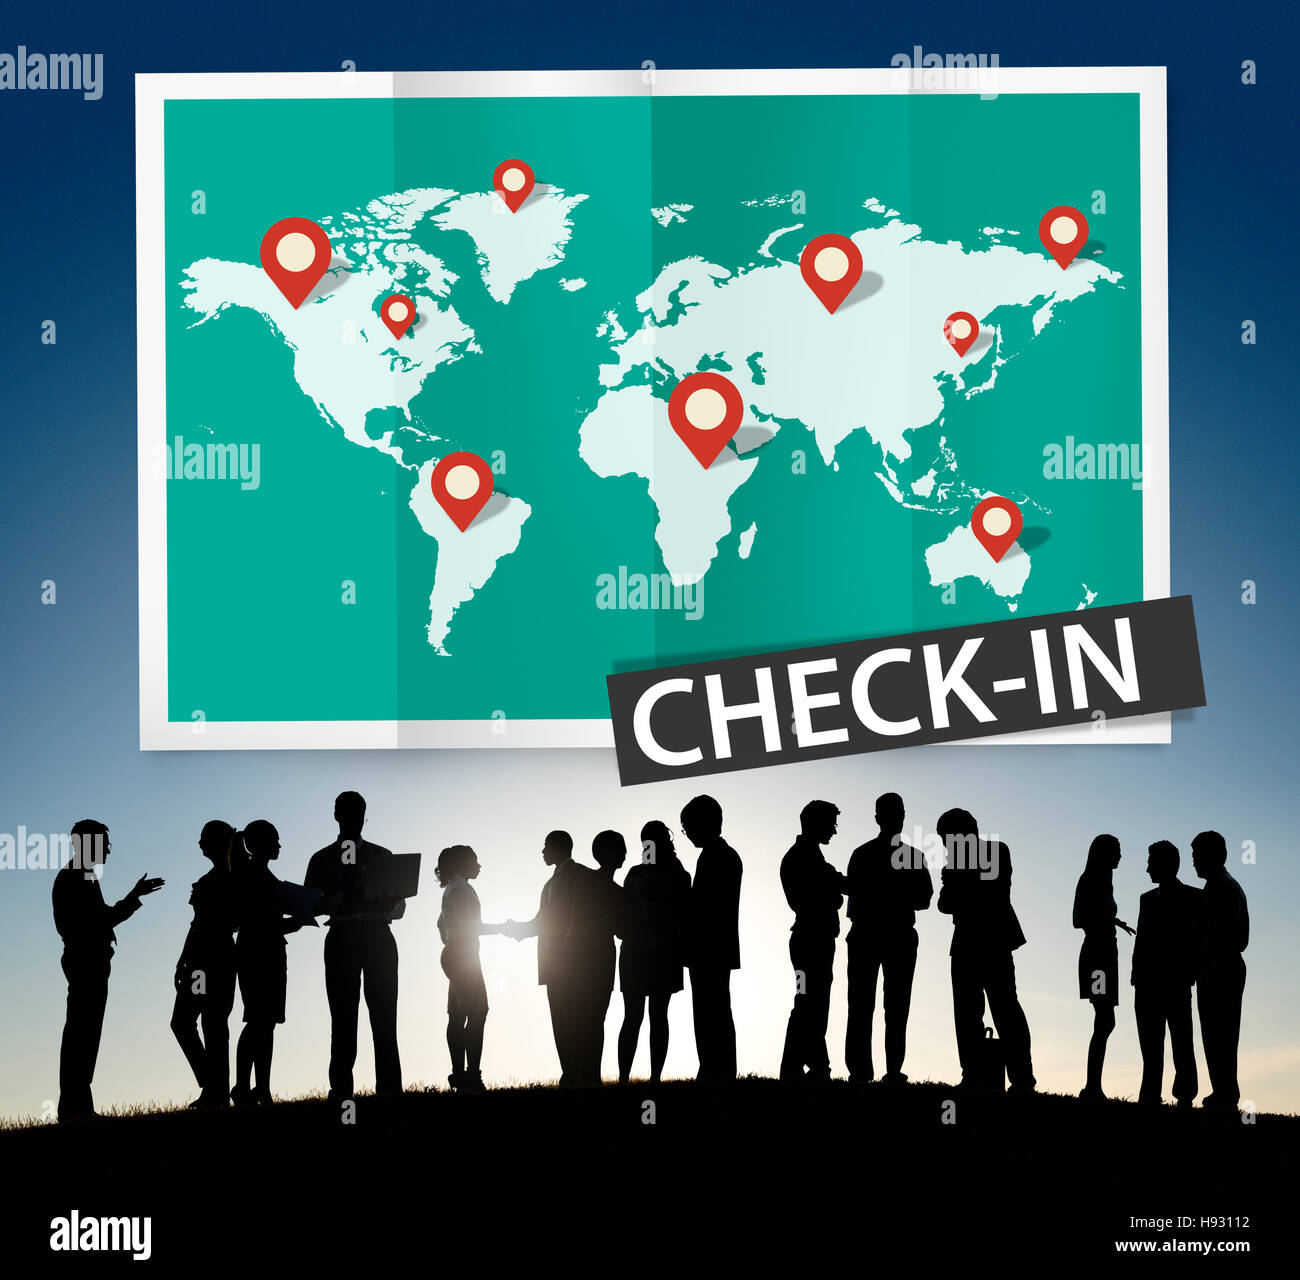 Check In Travel Locations Global World Tour Concept Stock Photo Alamy